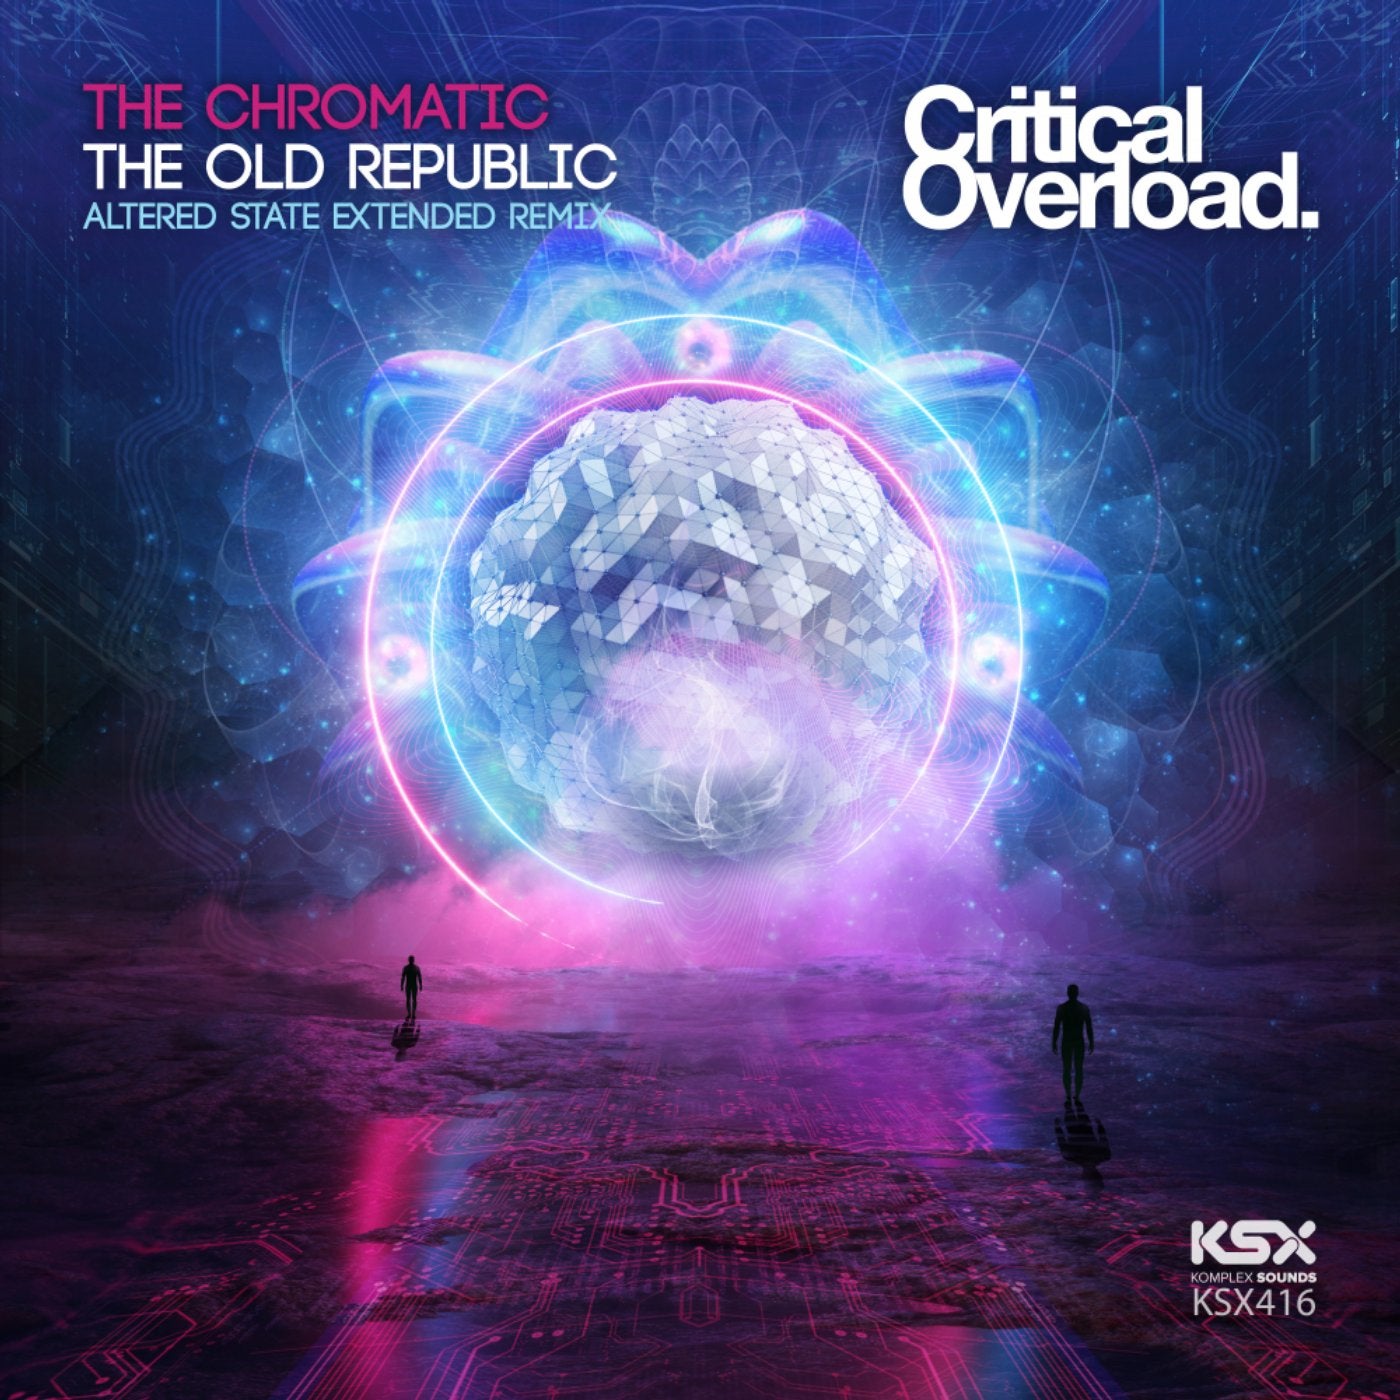 The Old Republic (Altered State Extended Remix)